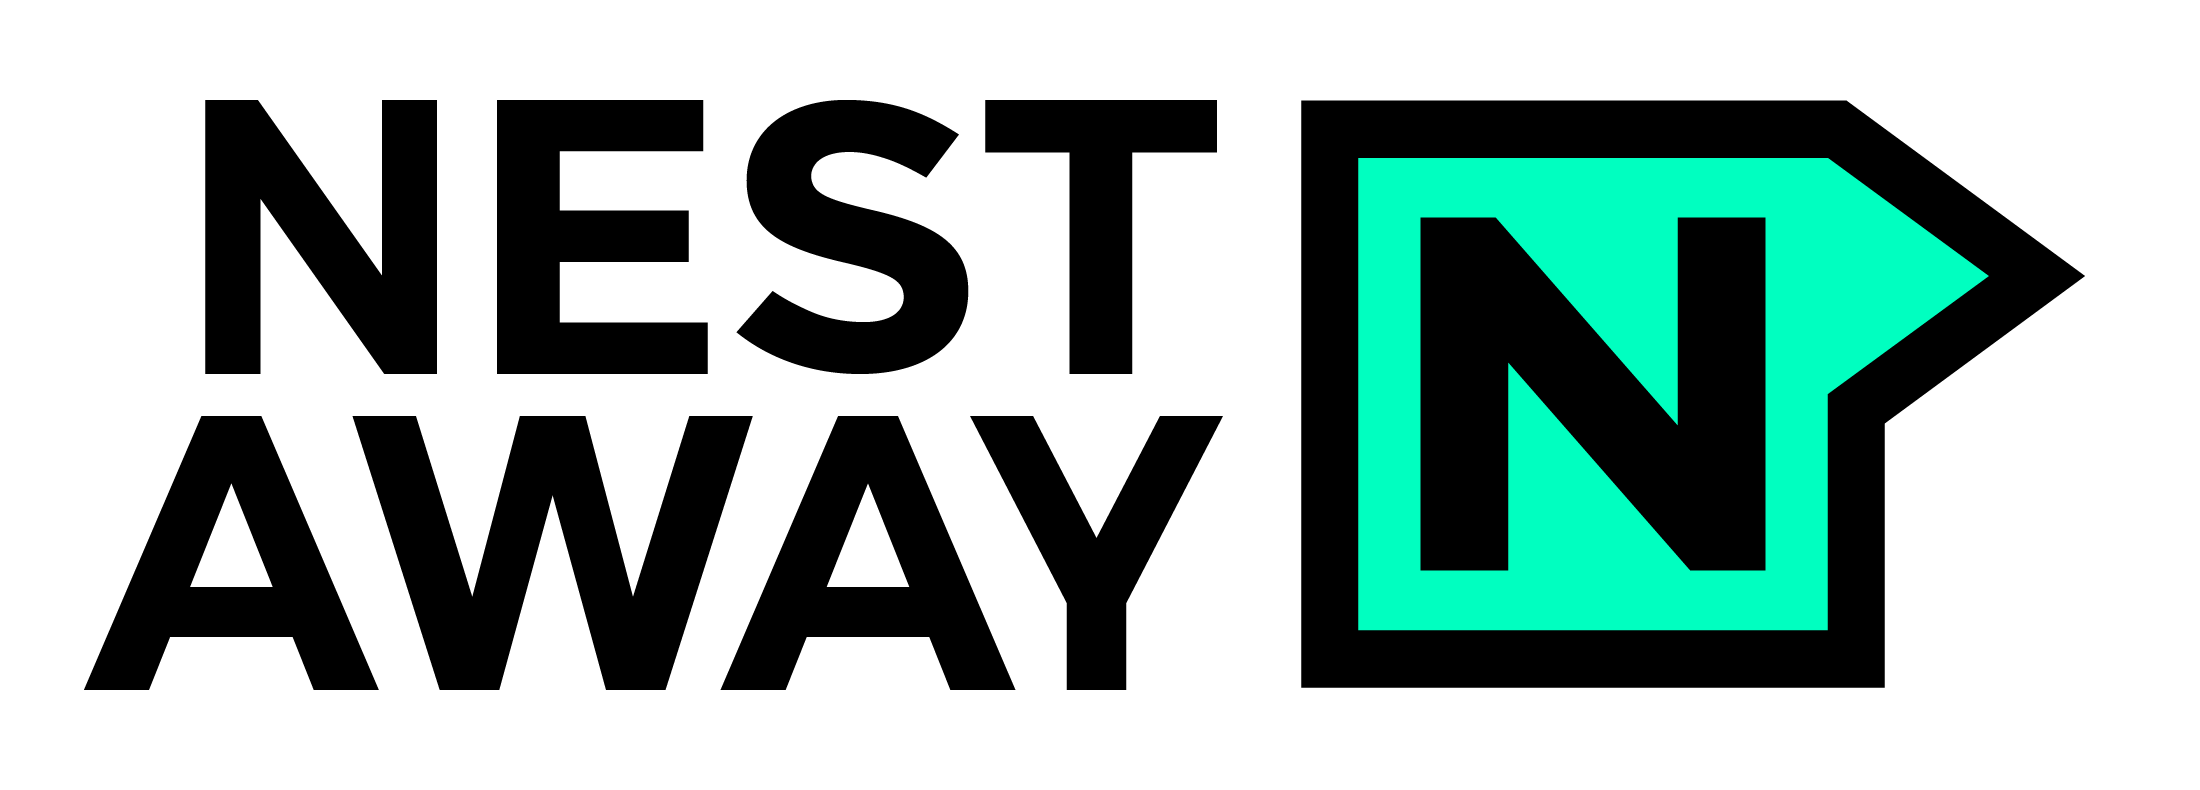 New Logo and Identity for Nestaway by Lopez Design